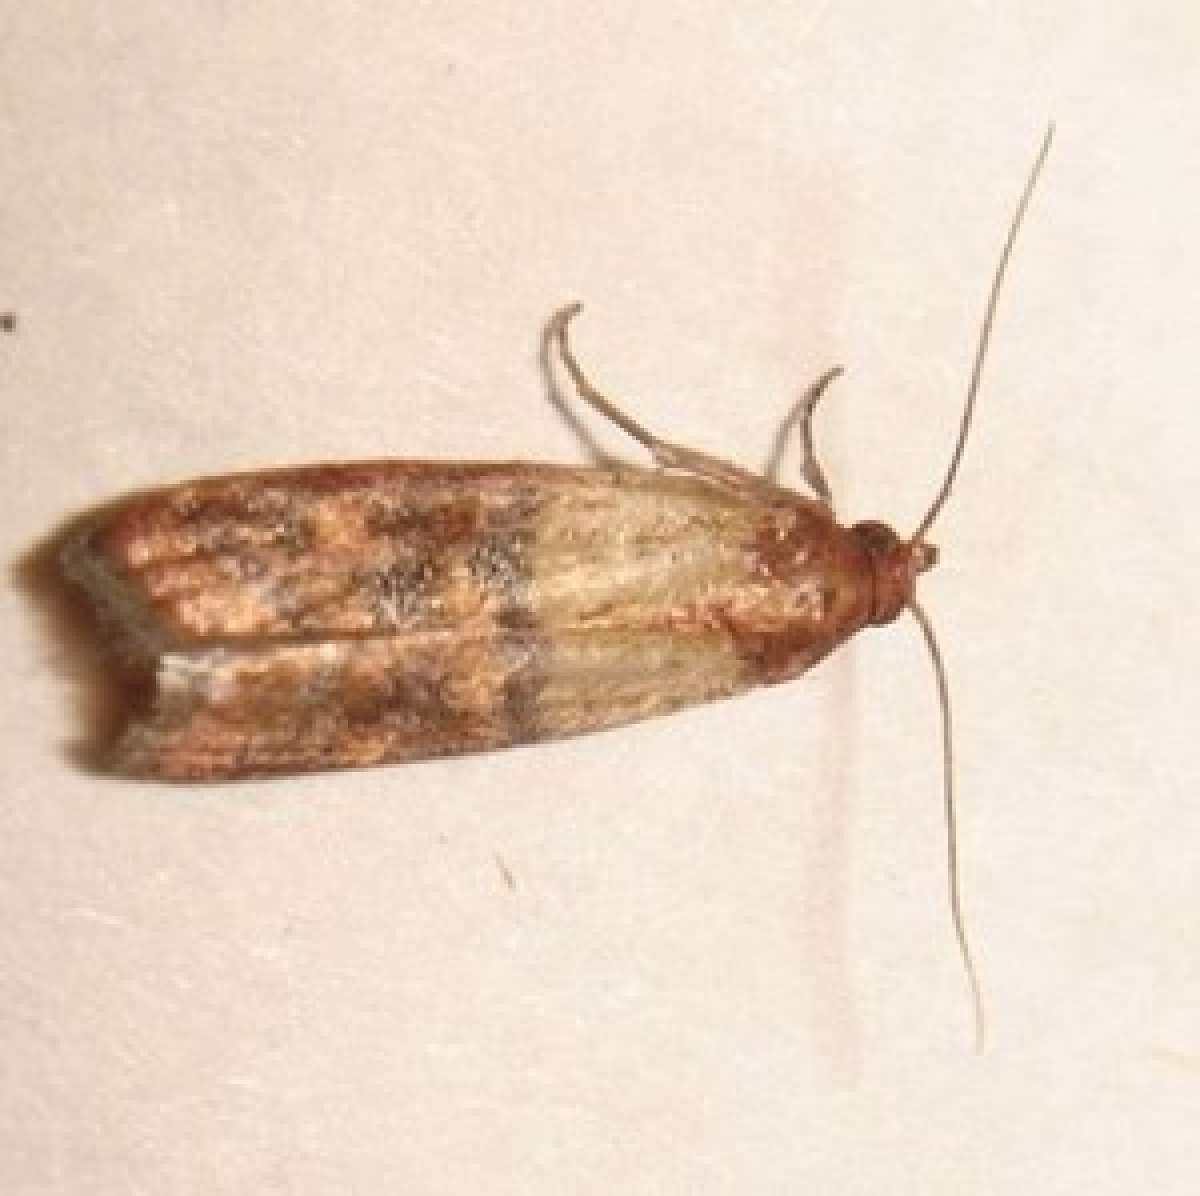 A grain moth.  They are very small